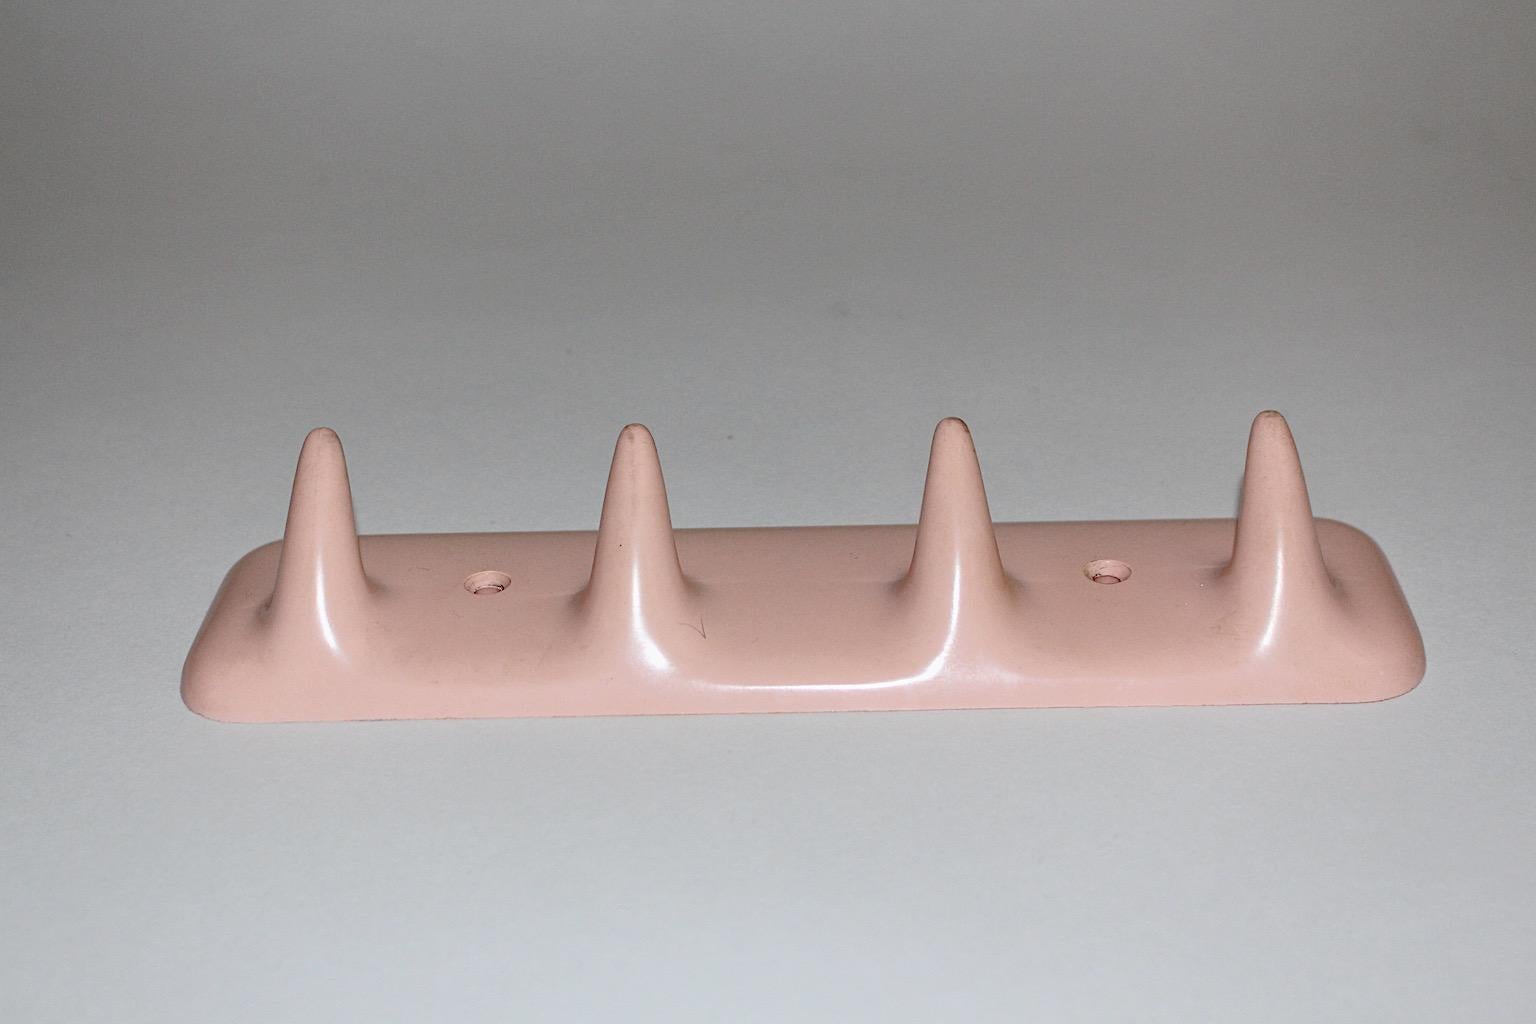 Mid Century Modern vintage coat rack or towel rack from plastic in soft pink color designed and manufactured Italy 1950s.
Stamped CM Mod. Sesia Brevettato Made in Italy
Wonderful rack to hang up your clothes in the anteroom or also to use the rack